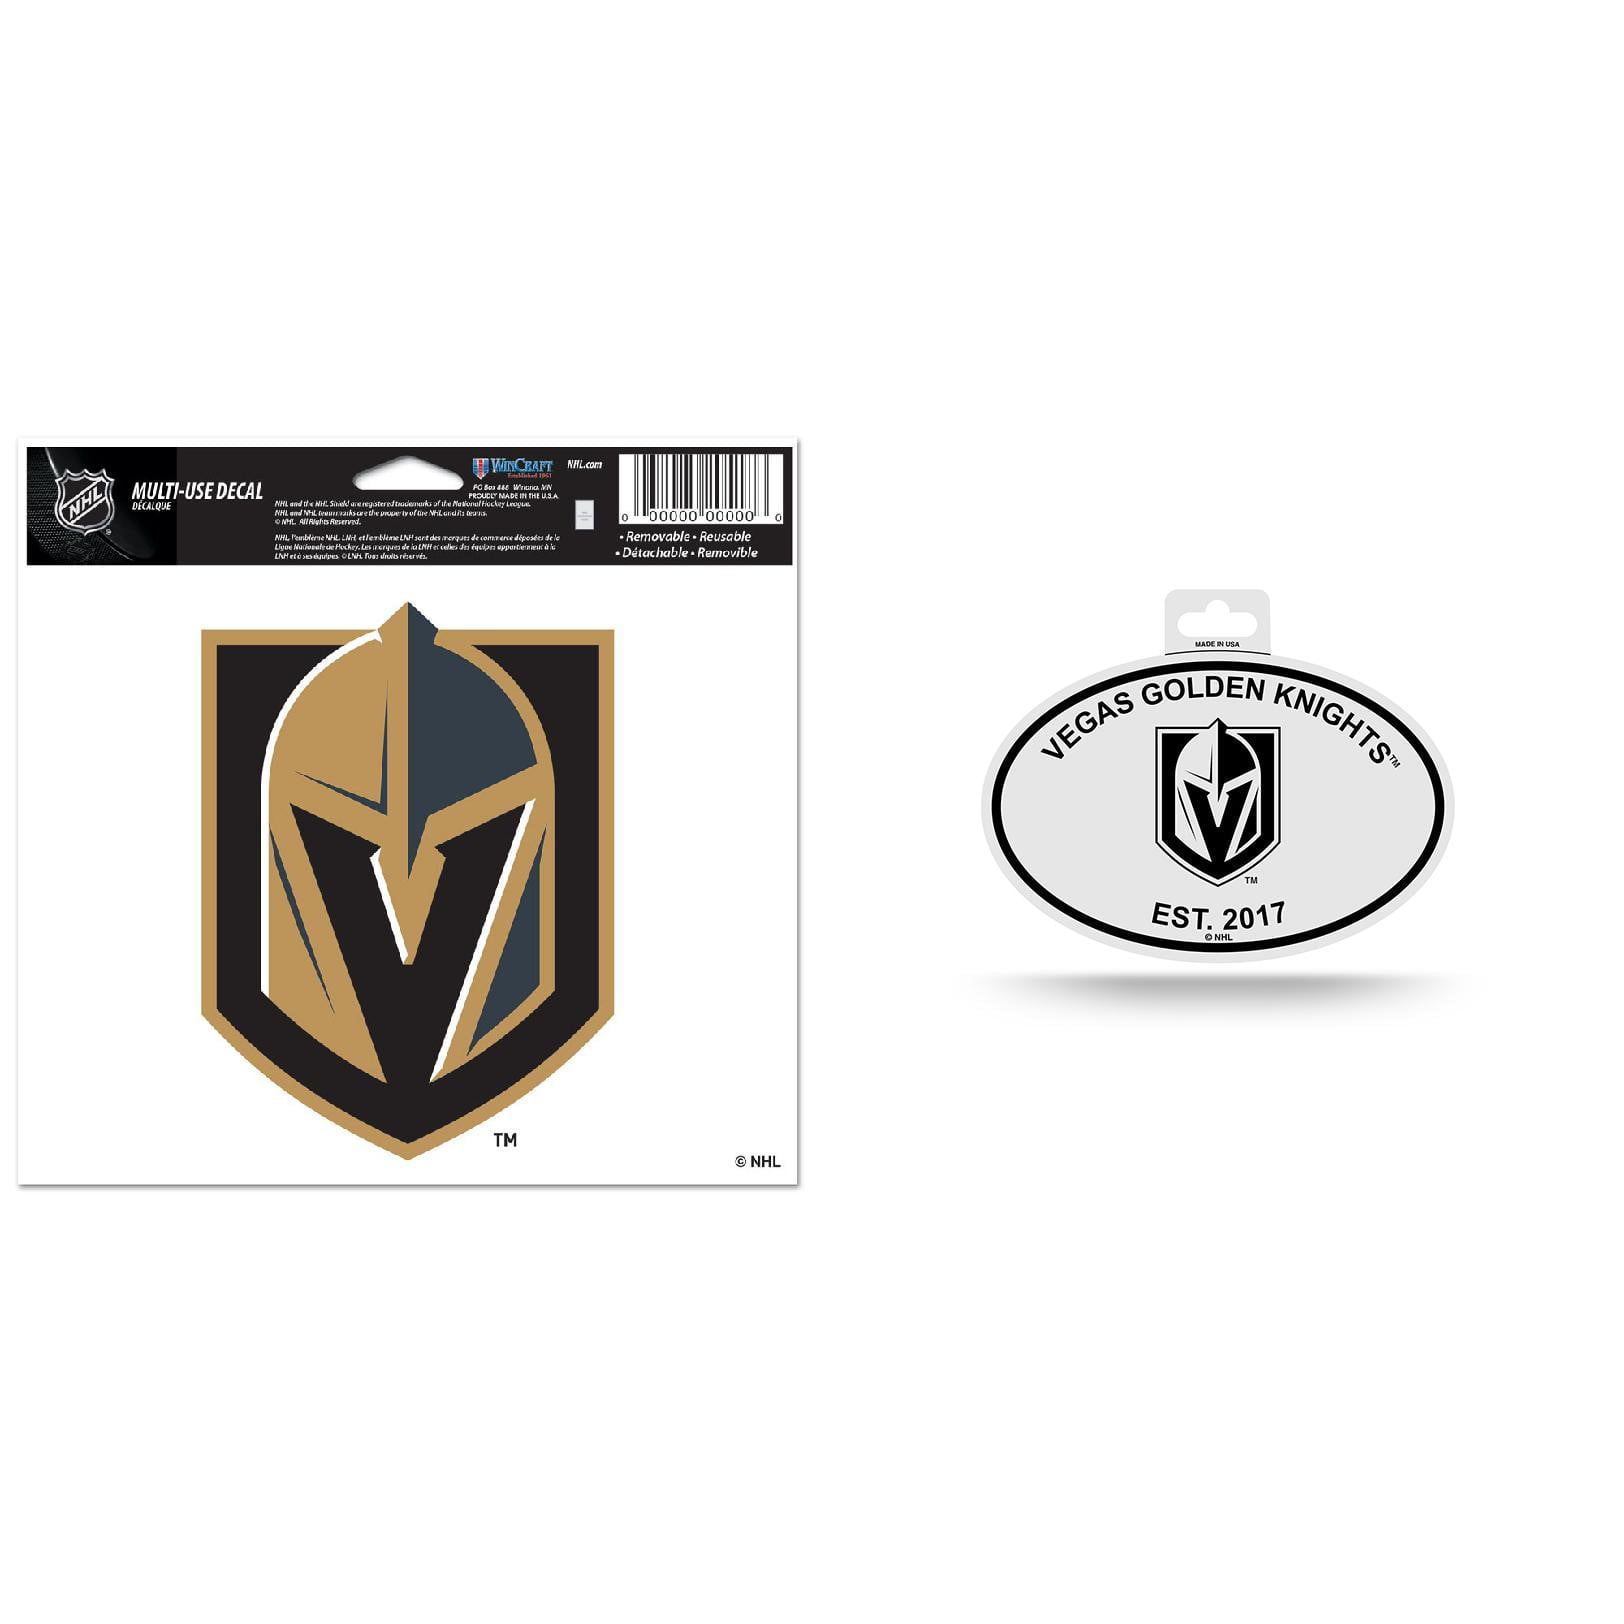 Vegas Golden Knights Official Nhl Automotive Car Decal 4 5x6 And Oval Black And White Round Automotive Car Decal 4 5x4 5 Bundle 2 Items Walmart Com Walmart Com